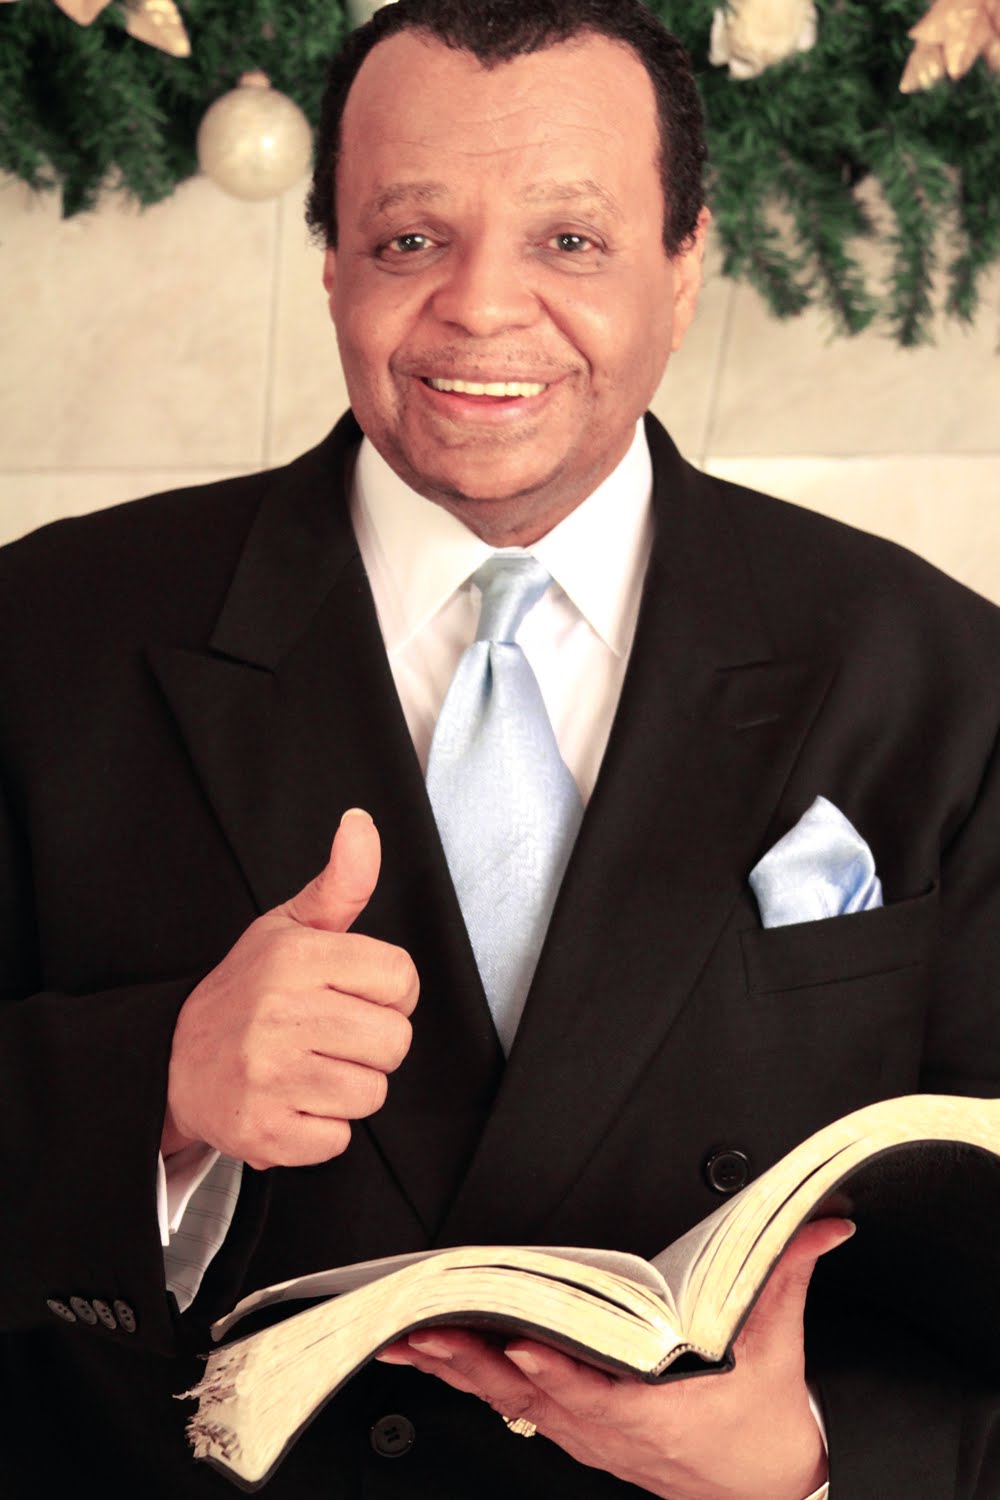 Pastor Thumbs Up